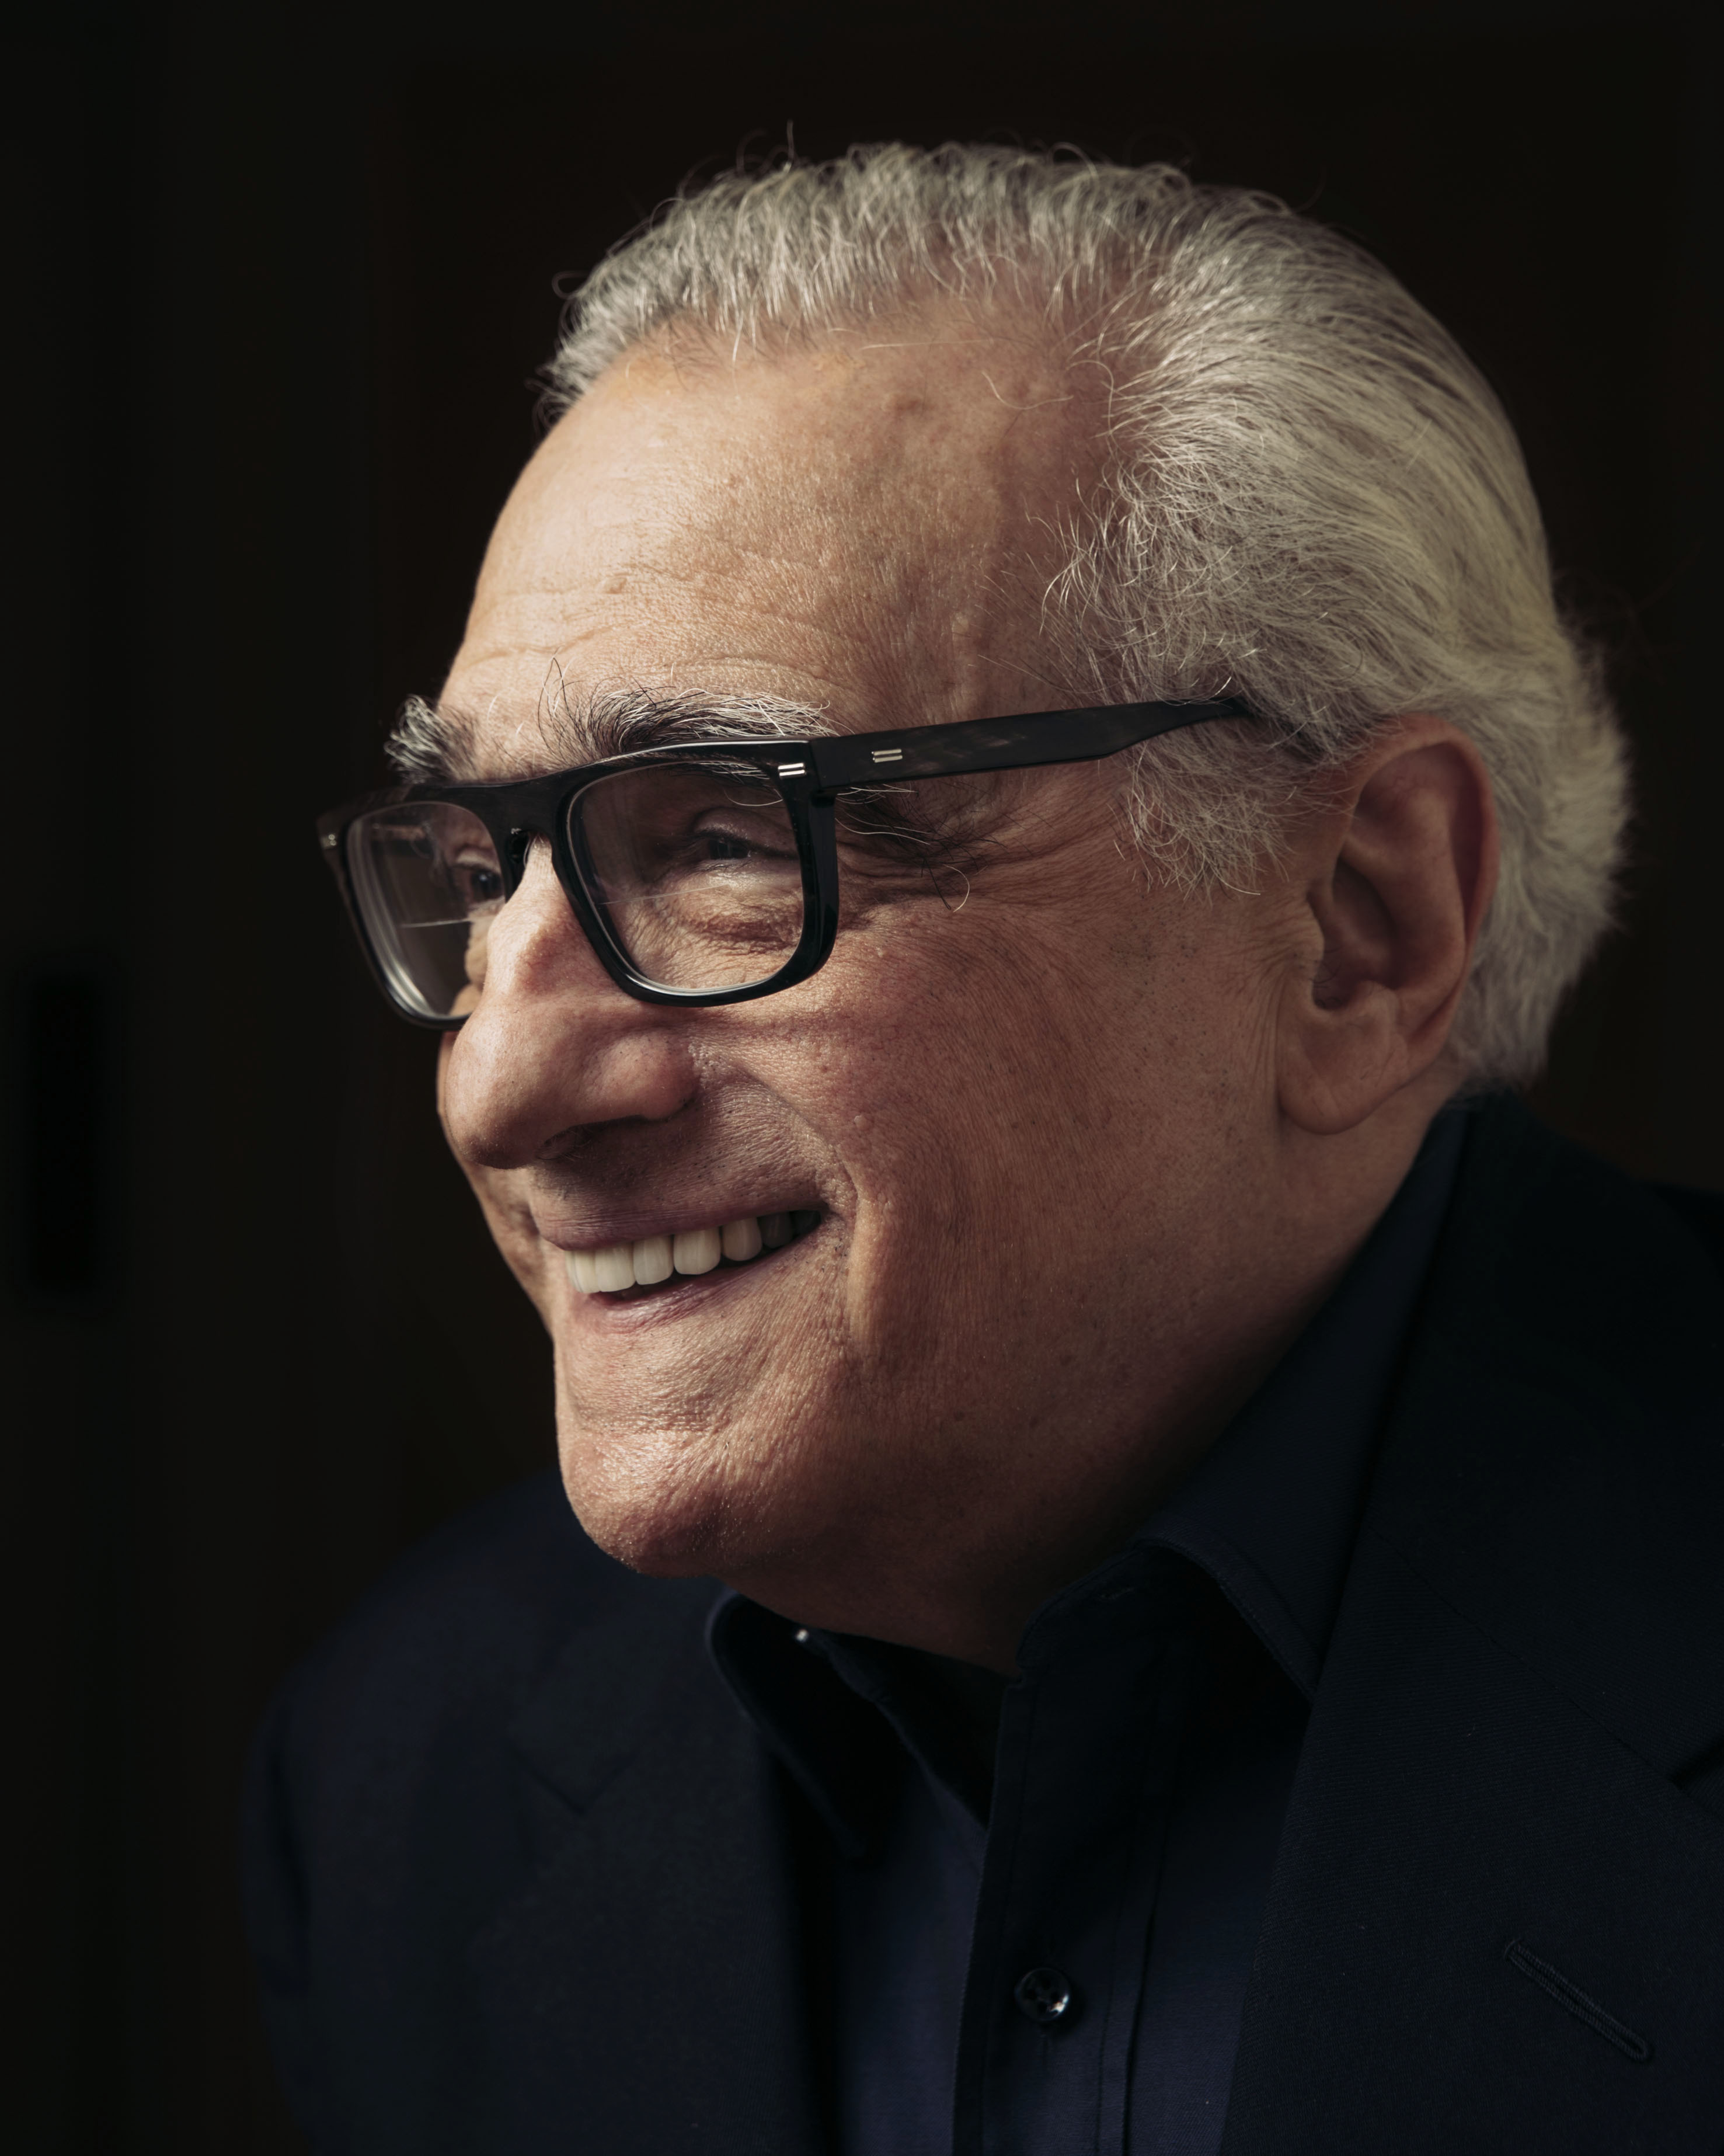 Hollywood film producer and director Martin Scorsese. (Photo by Victoria Will/Invision/AP)